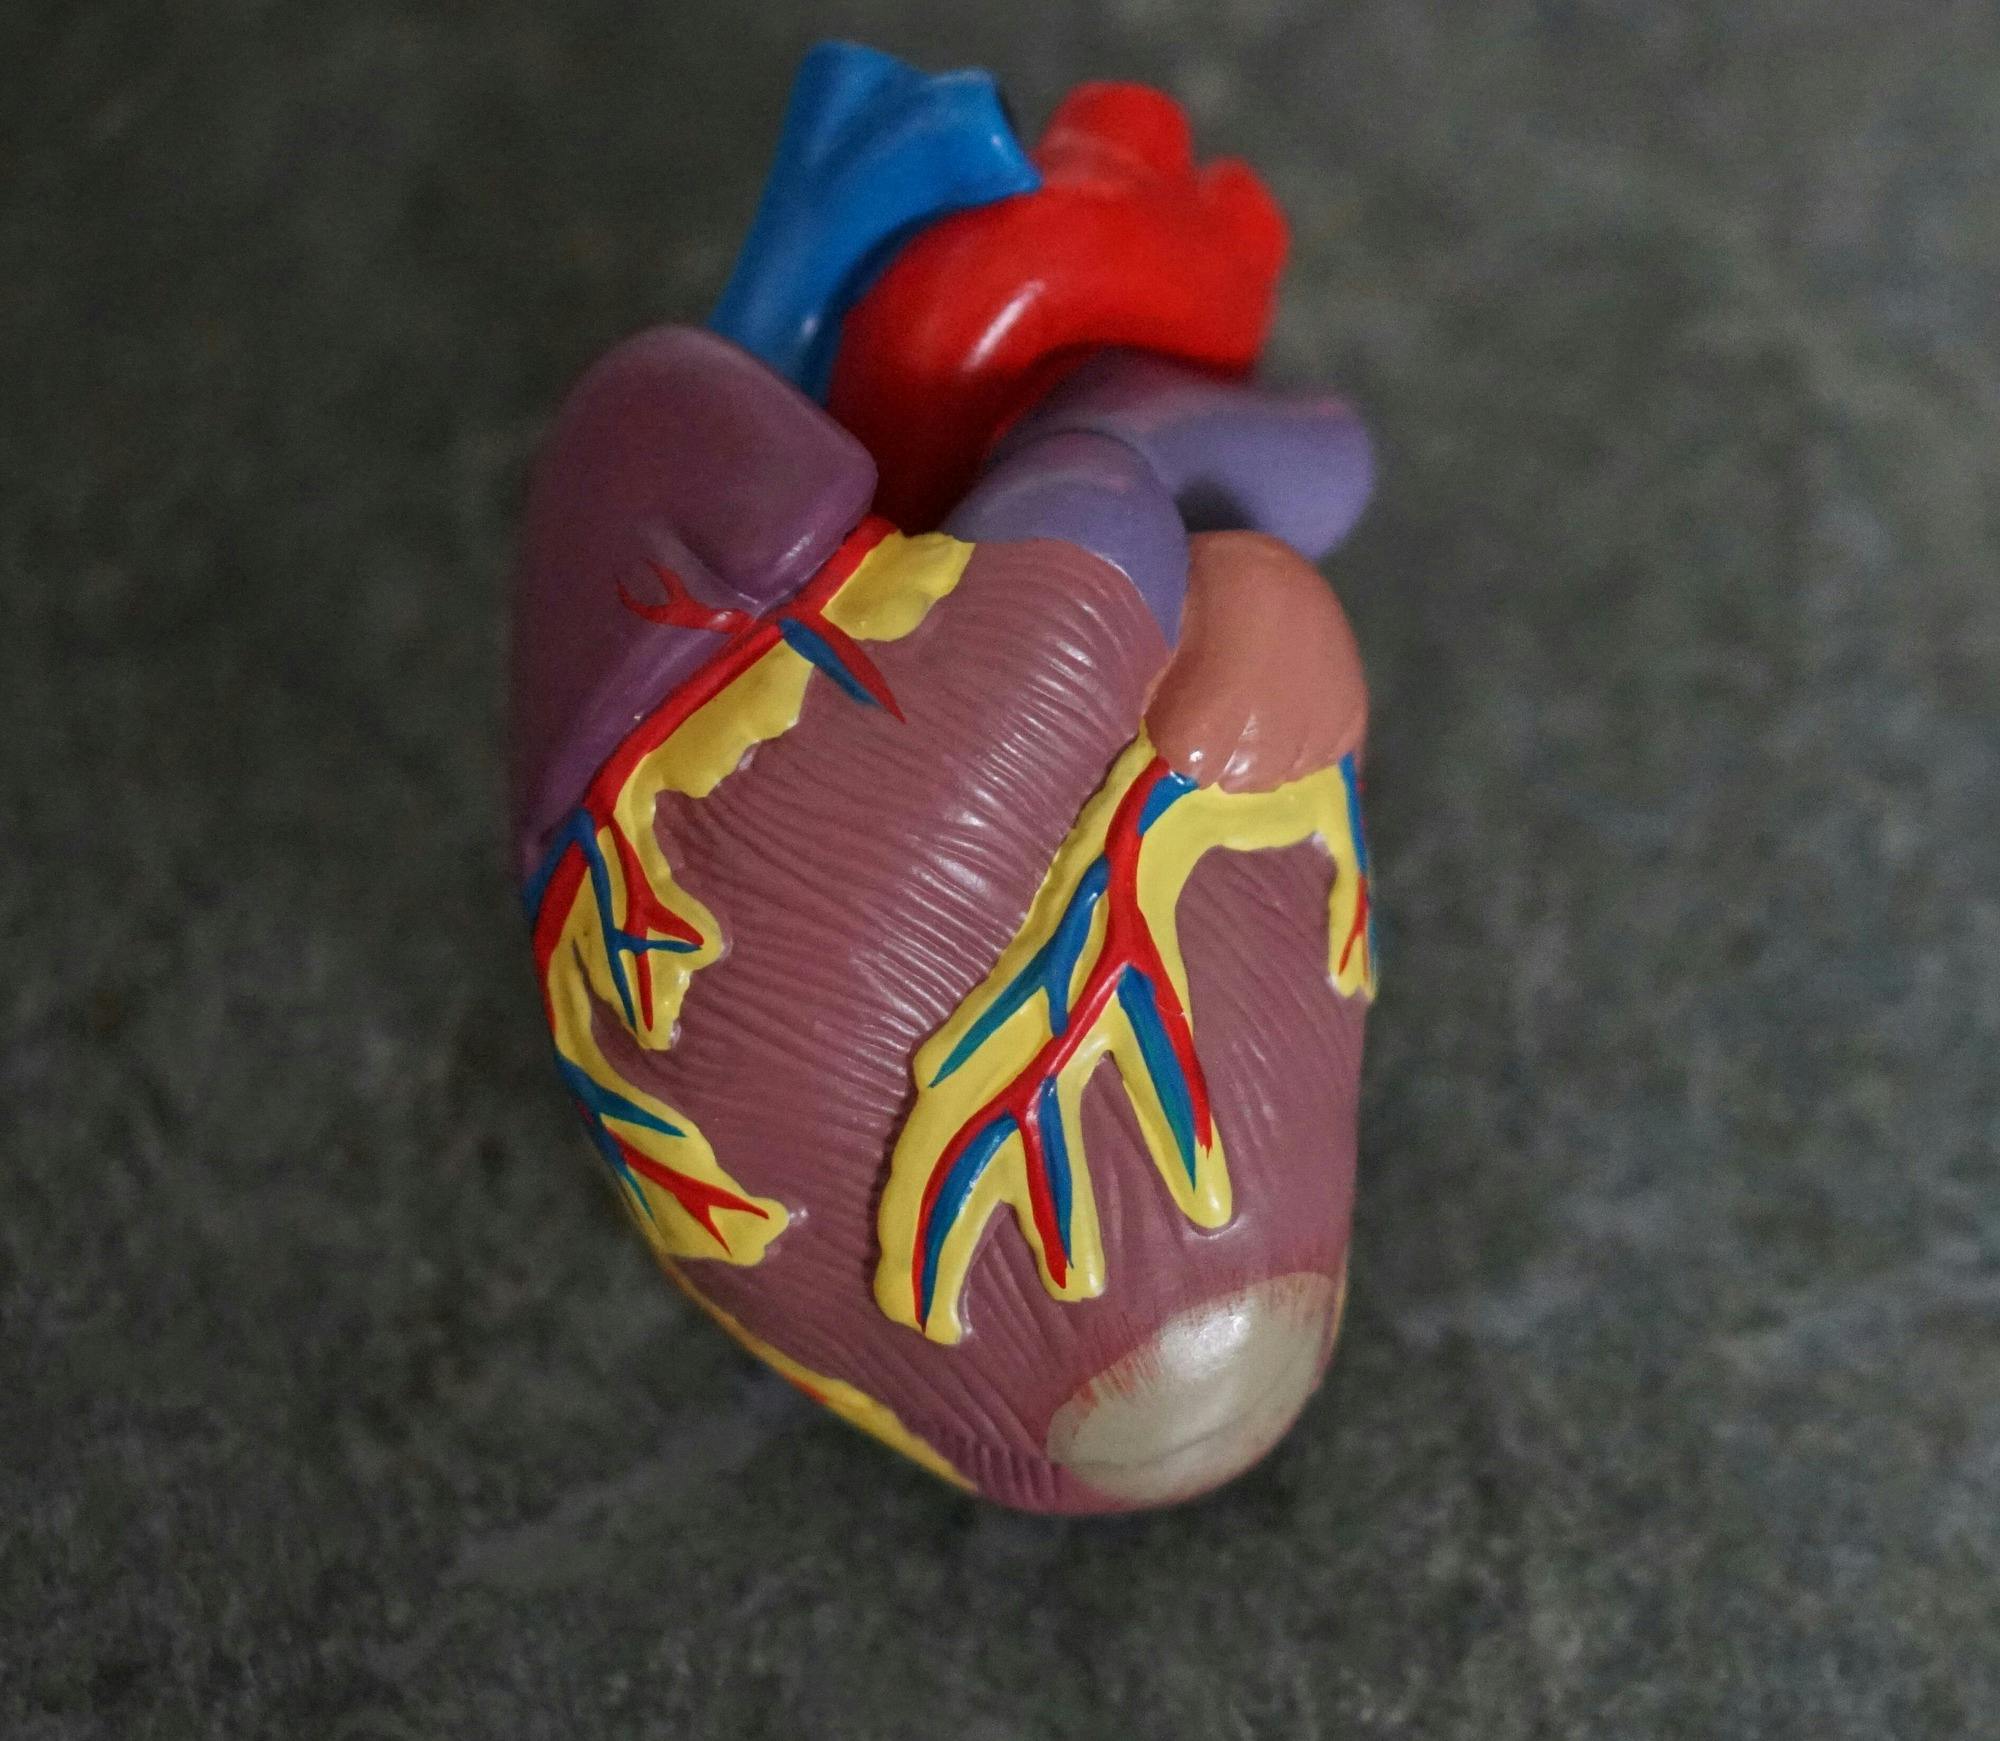 Photo of anatomical model of human heart sitting on a flat surface.